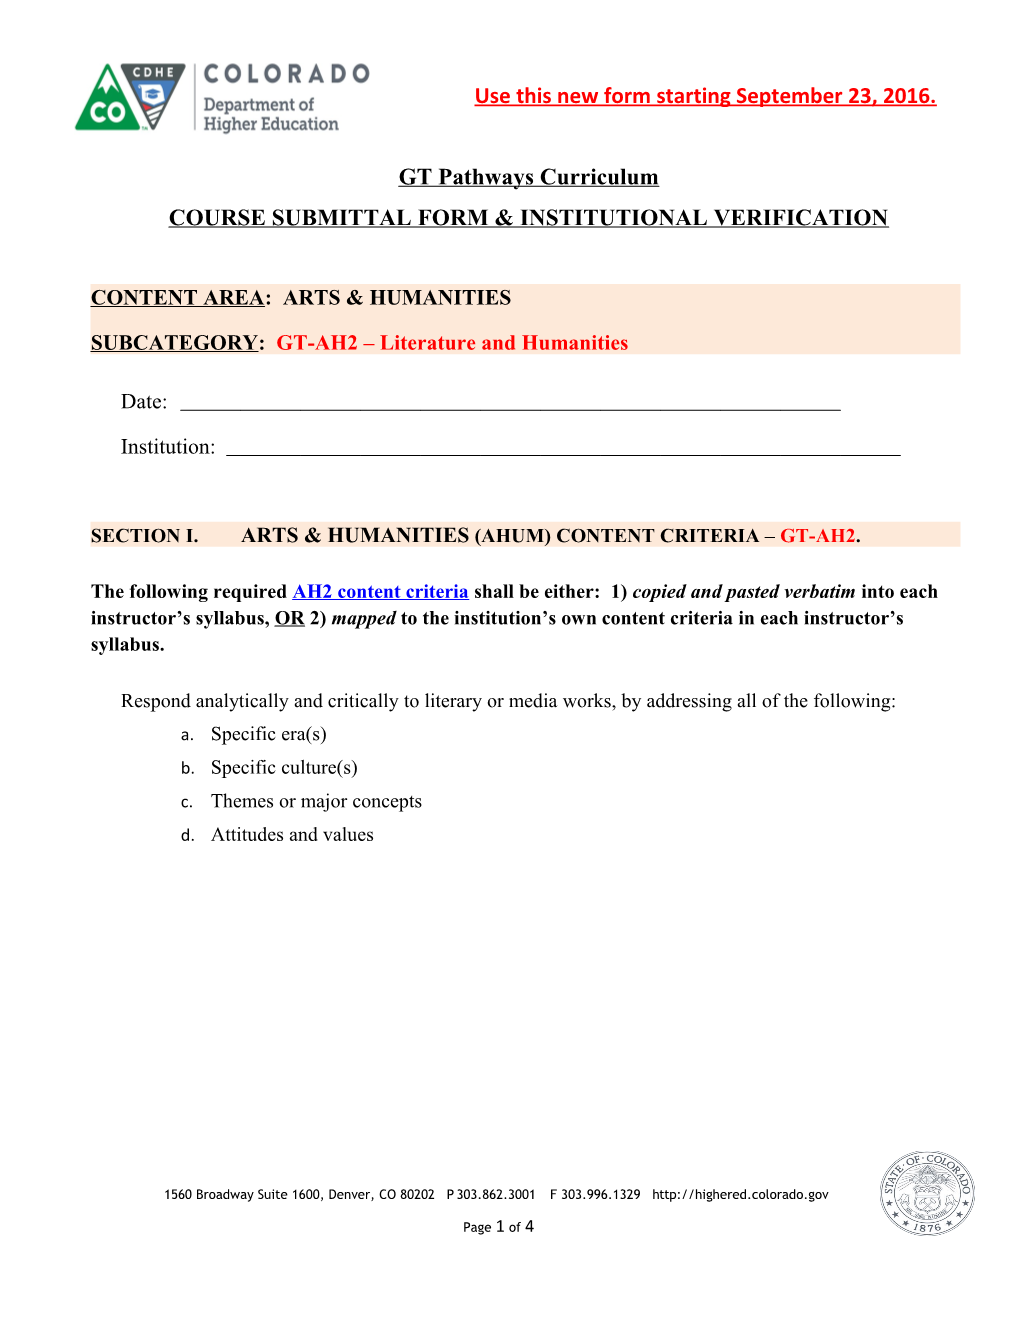 Course Submittal Form & Institutional Verification